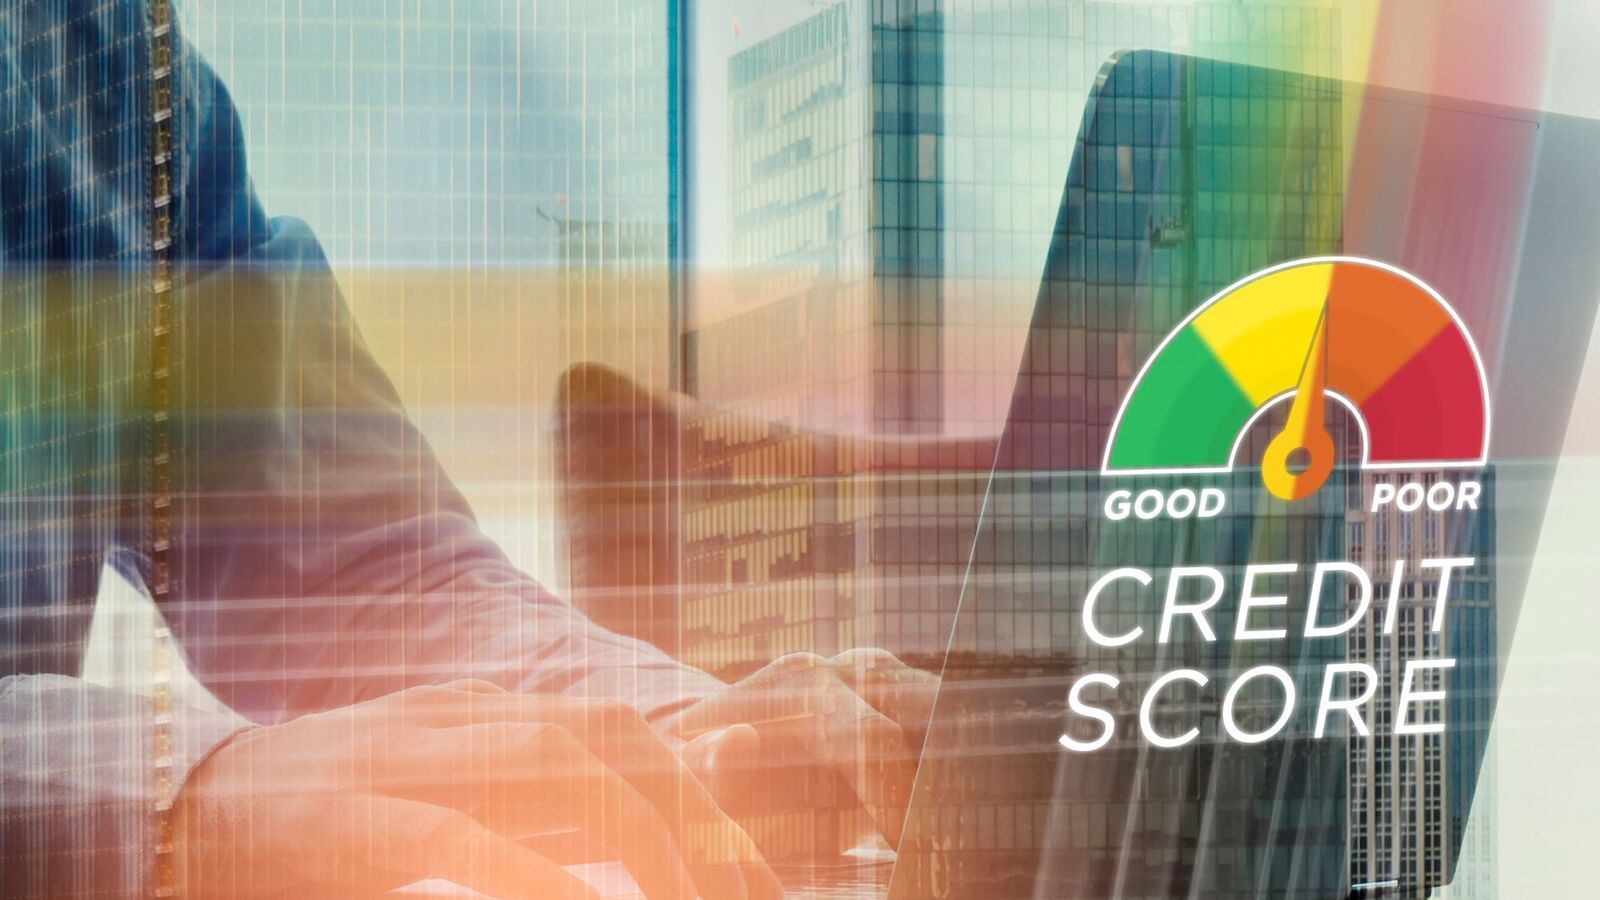 How does regular credit card usage affect your credit score over time? Experts explain